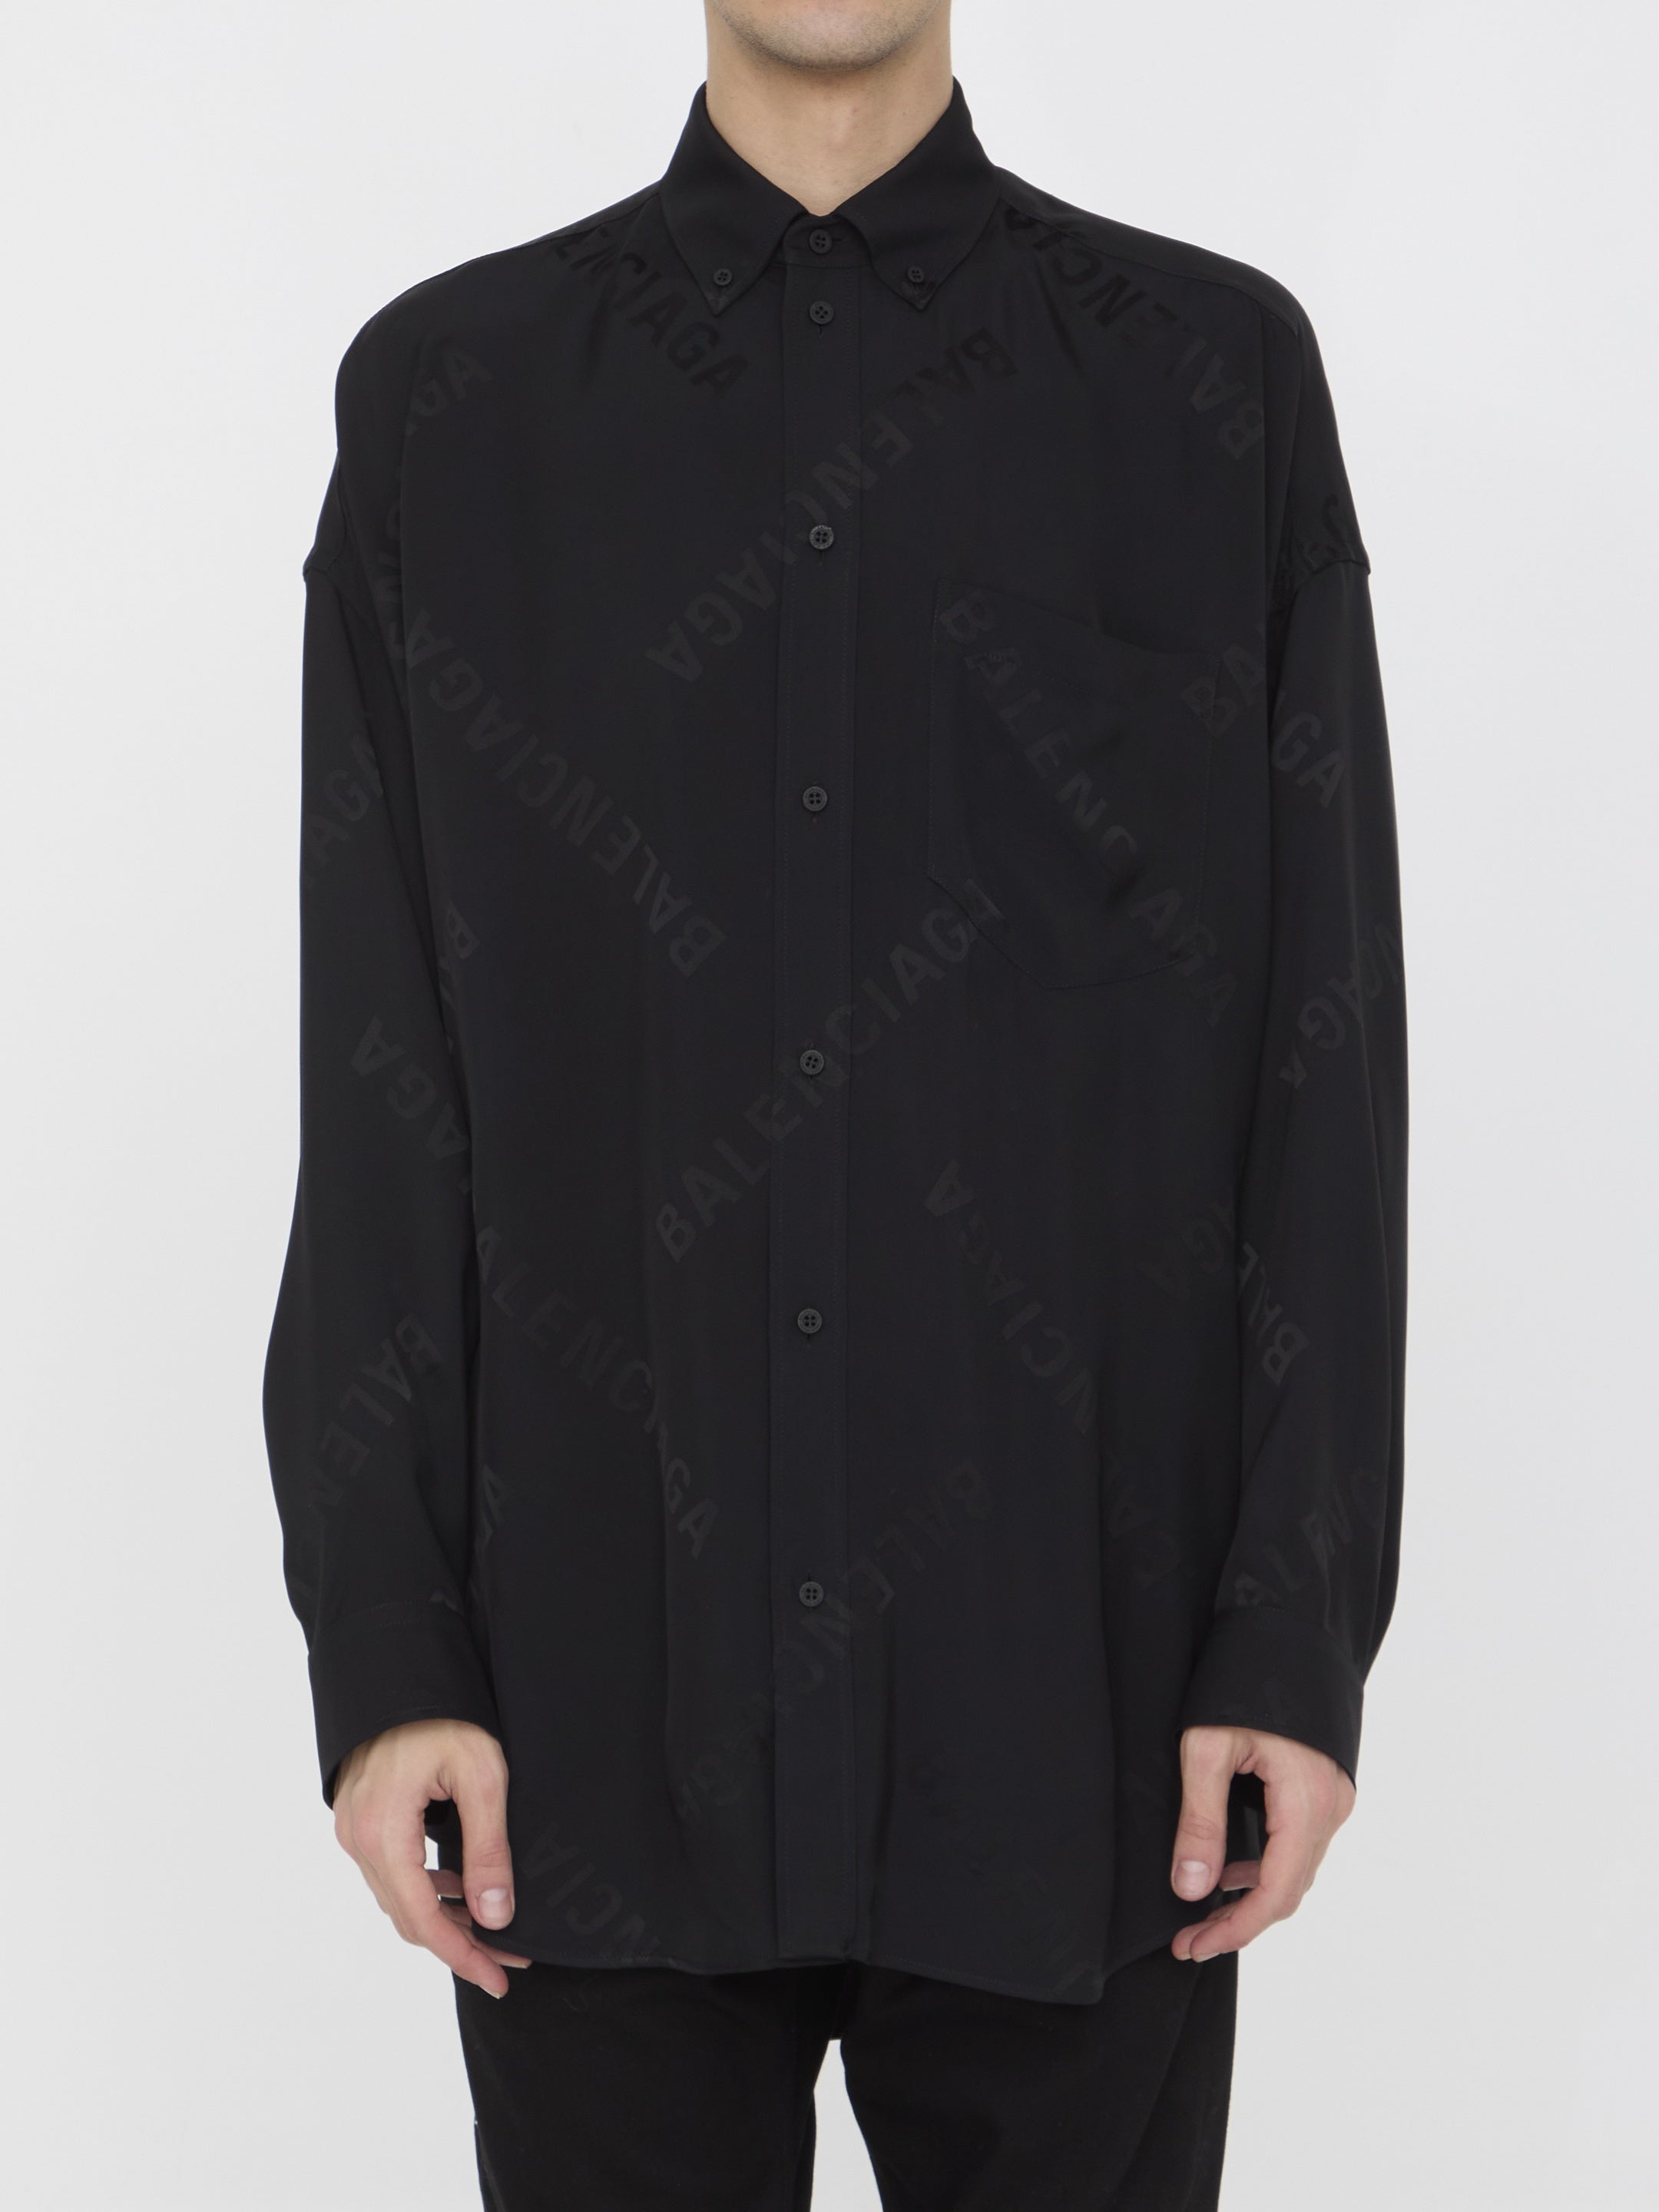 BALENCIAGA-OUTLET-SALE-Cocoon-shirt-Shirts-S-BLACK-ARCHIVE-COLLECTION.jpg